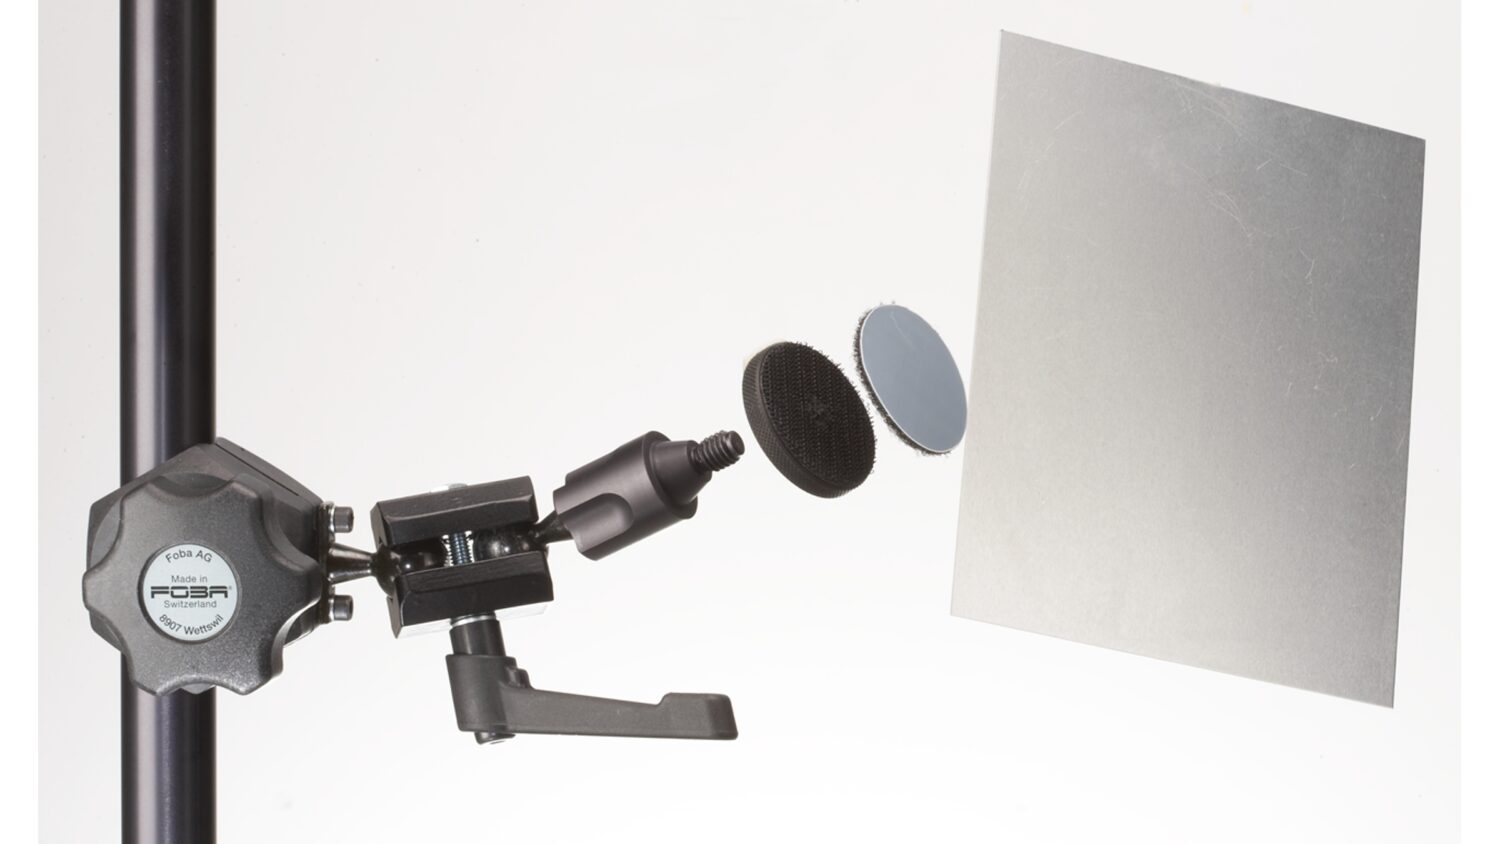 FOBA articulated arm on combitube with holder plate and metal sheet